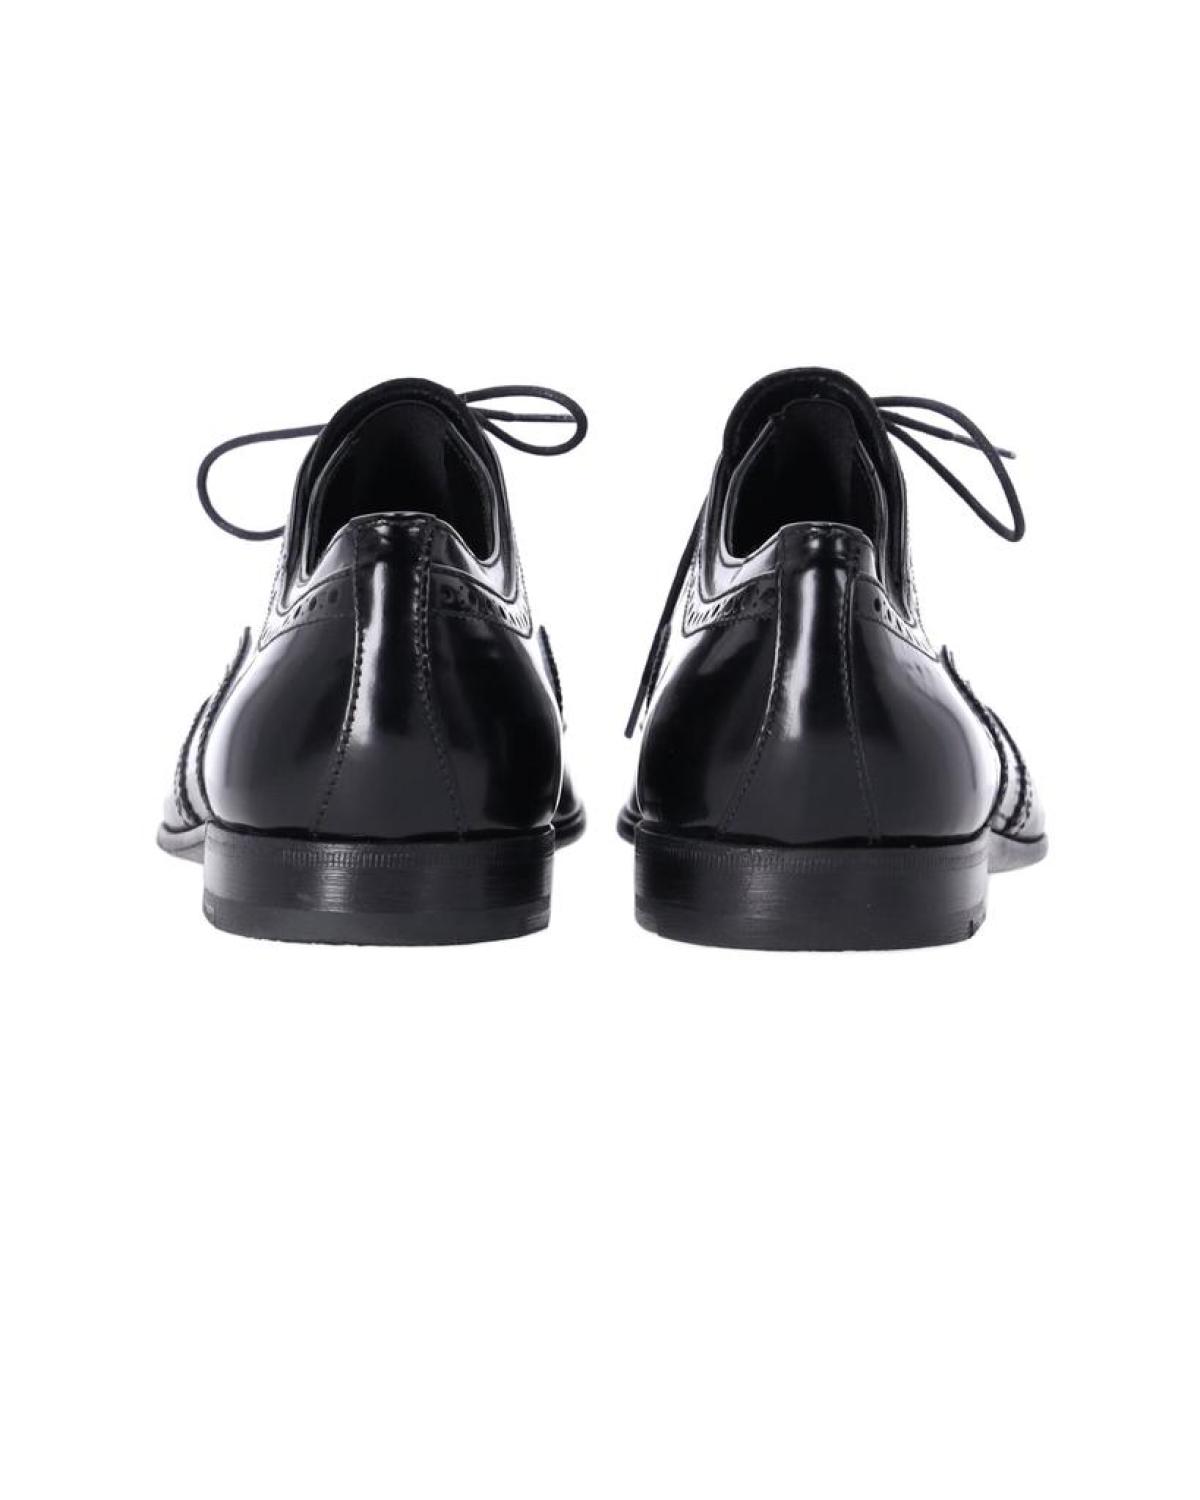 Prada Lace Up Brogues in Black Patent Leather